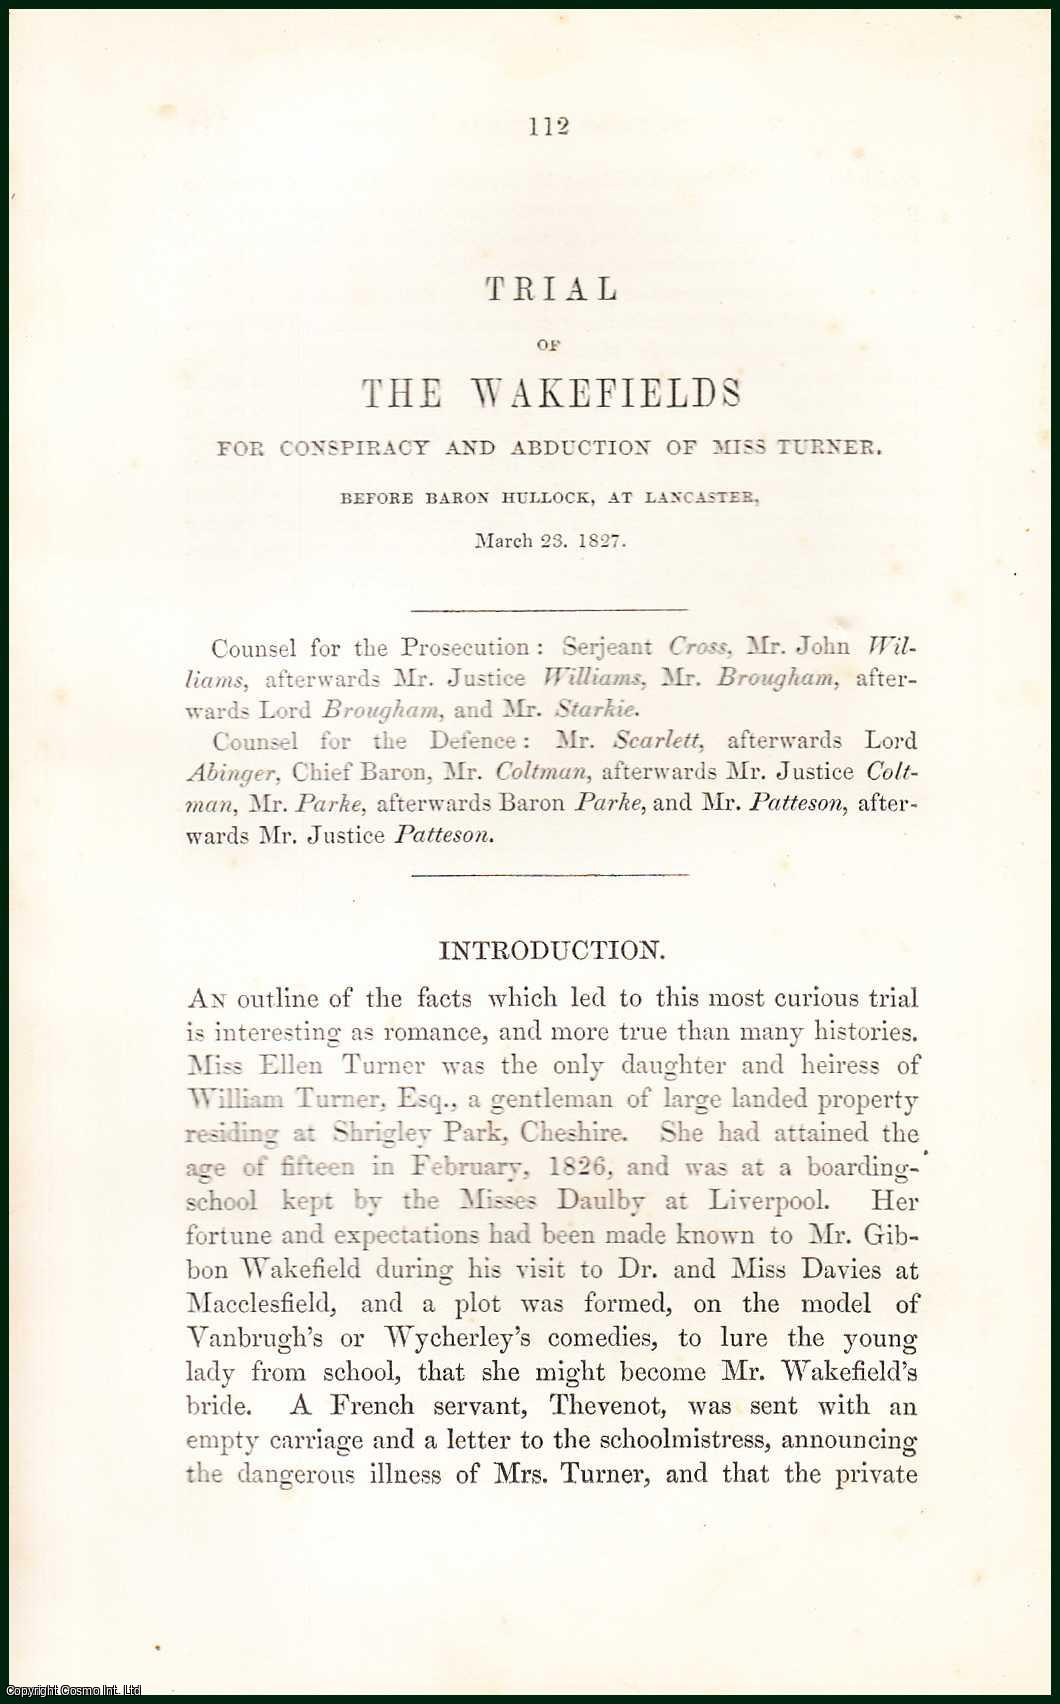 [Trial] - The Trial of The Wakefields for Conspiracy & Abduction of Miss Turner. Before Baron Hullock, at Lancaster, 1827. An uncommon original article from the Collected State Trials, 1850.